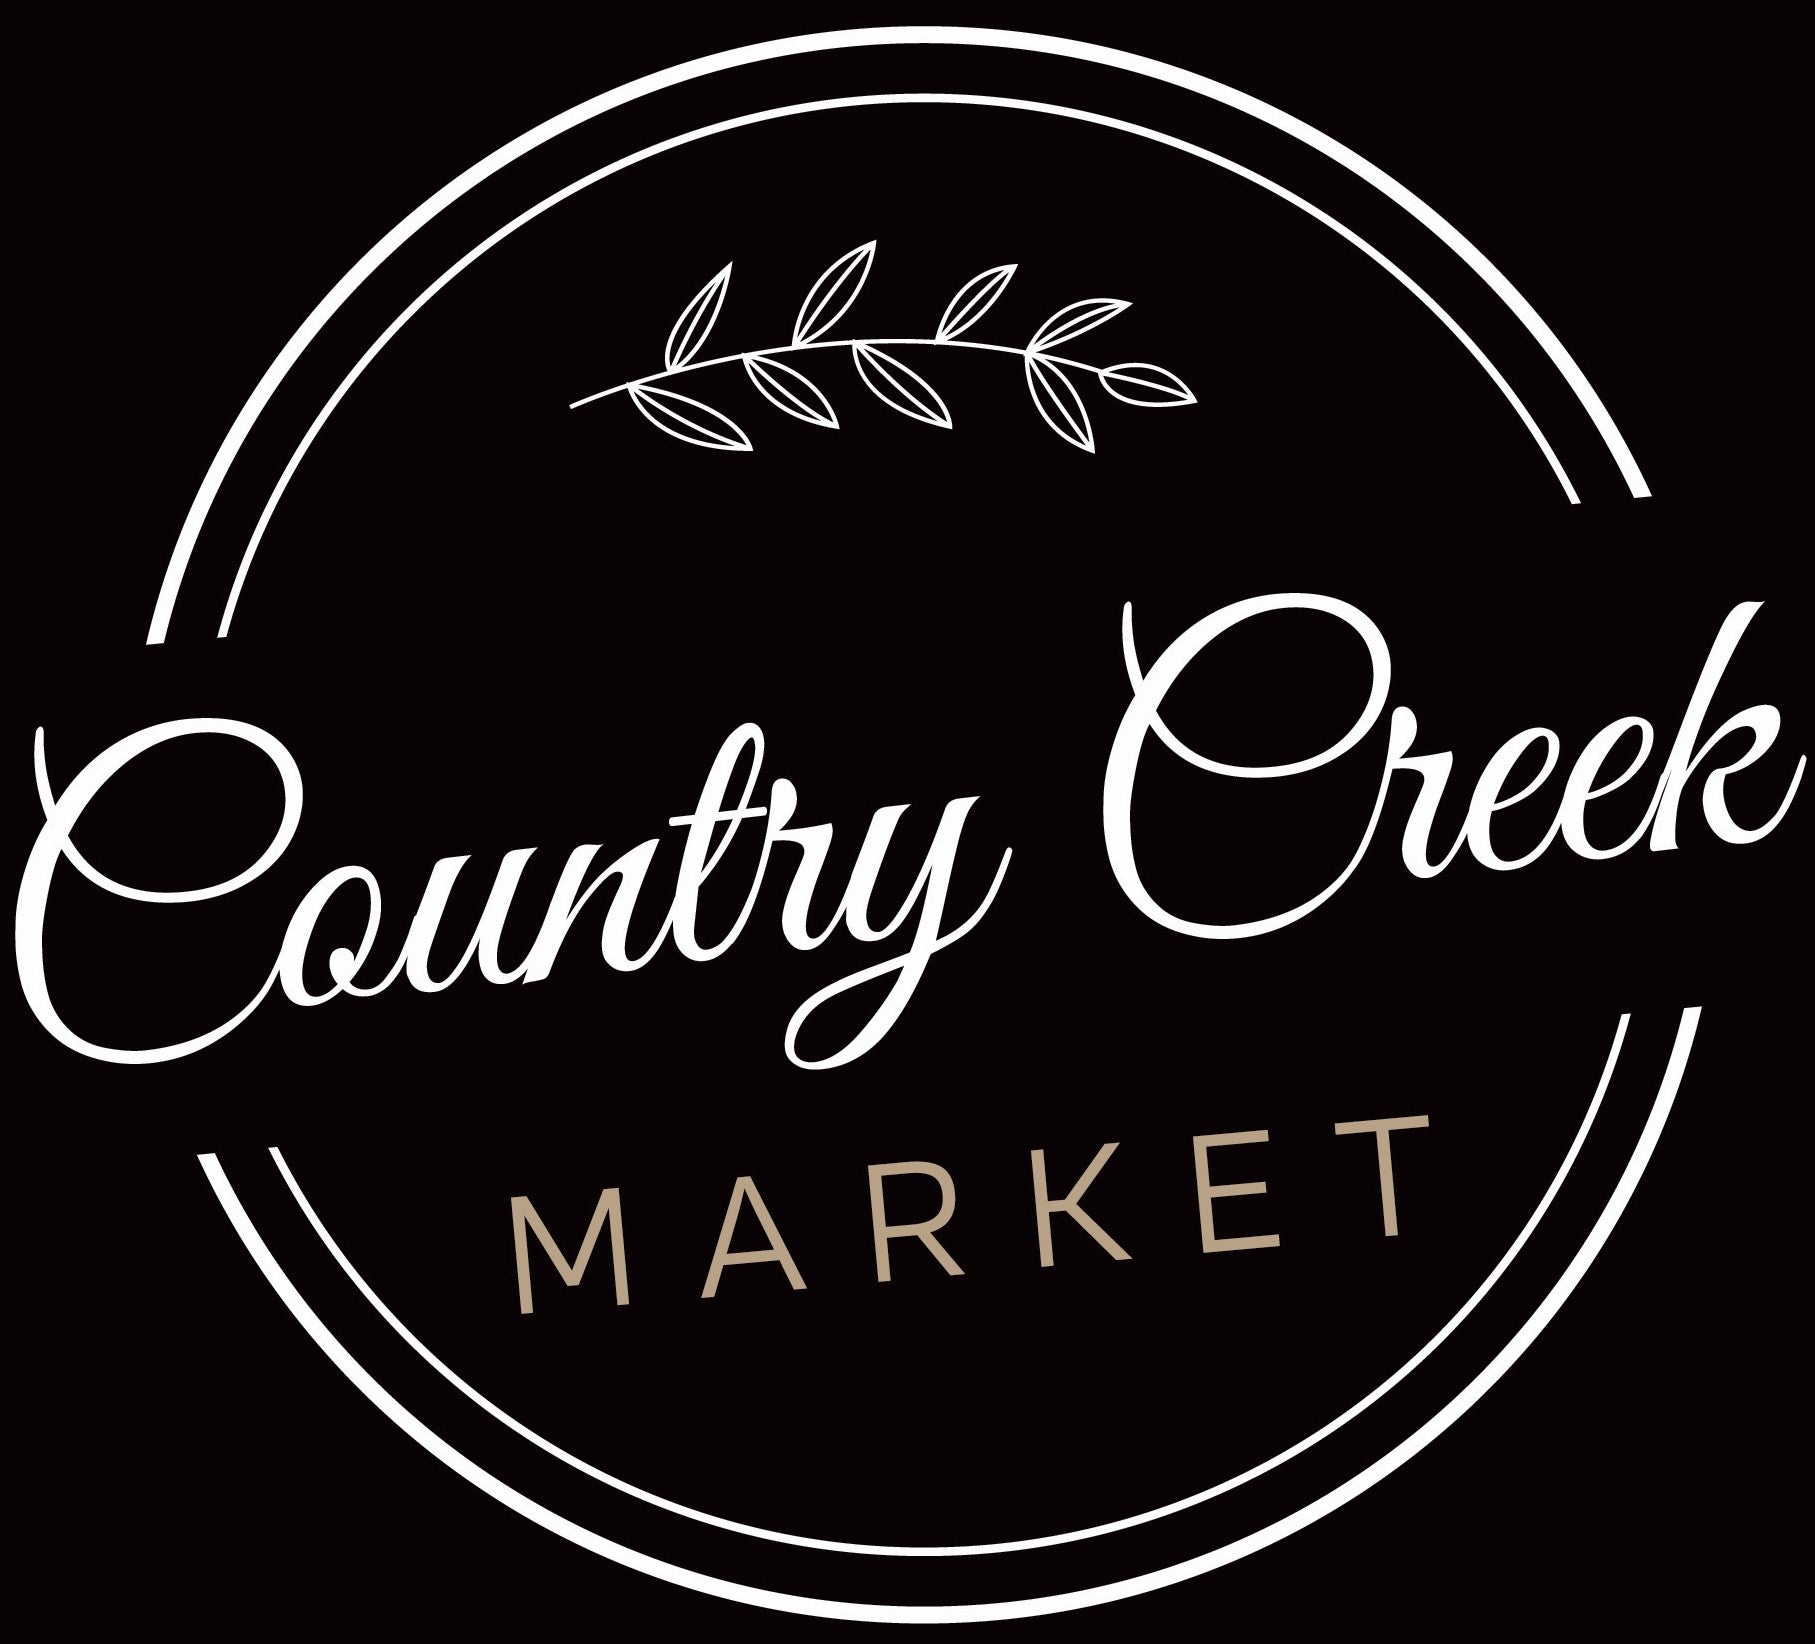 Country Creek Market